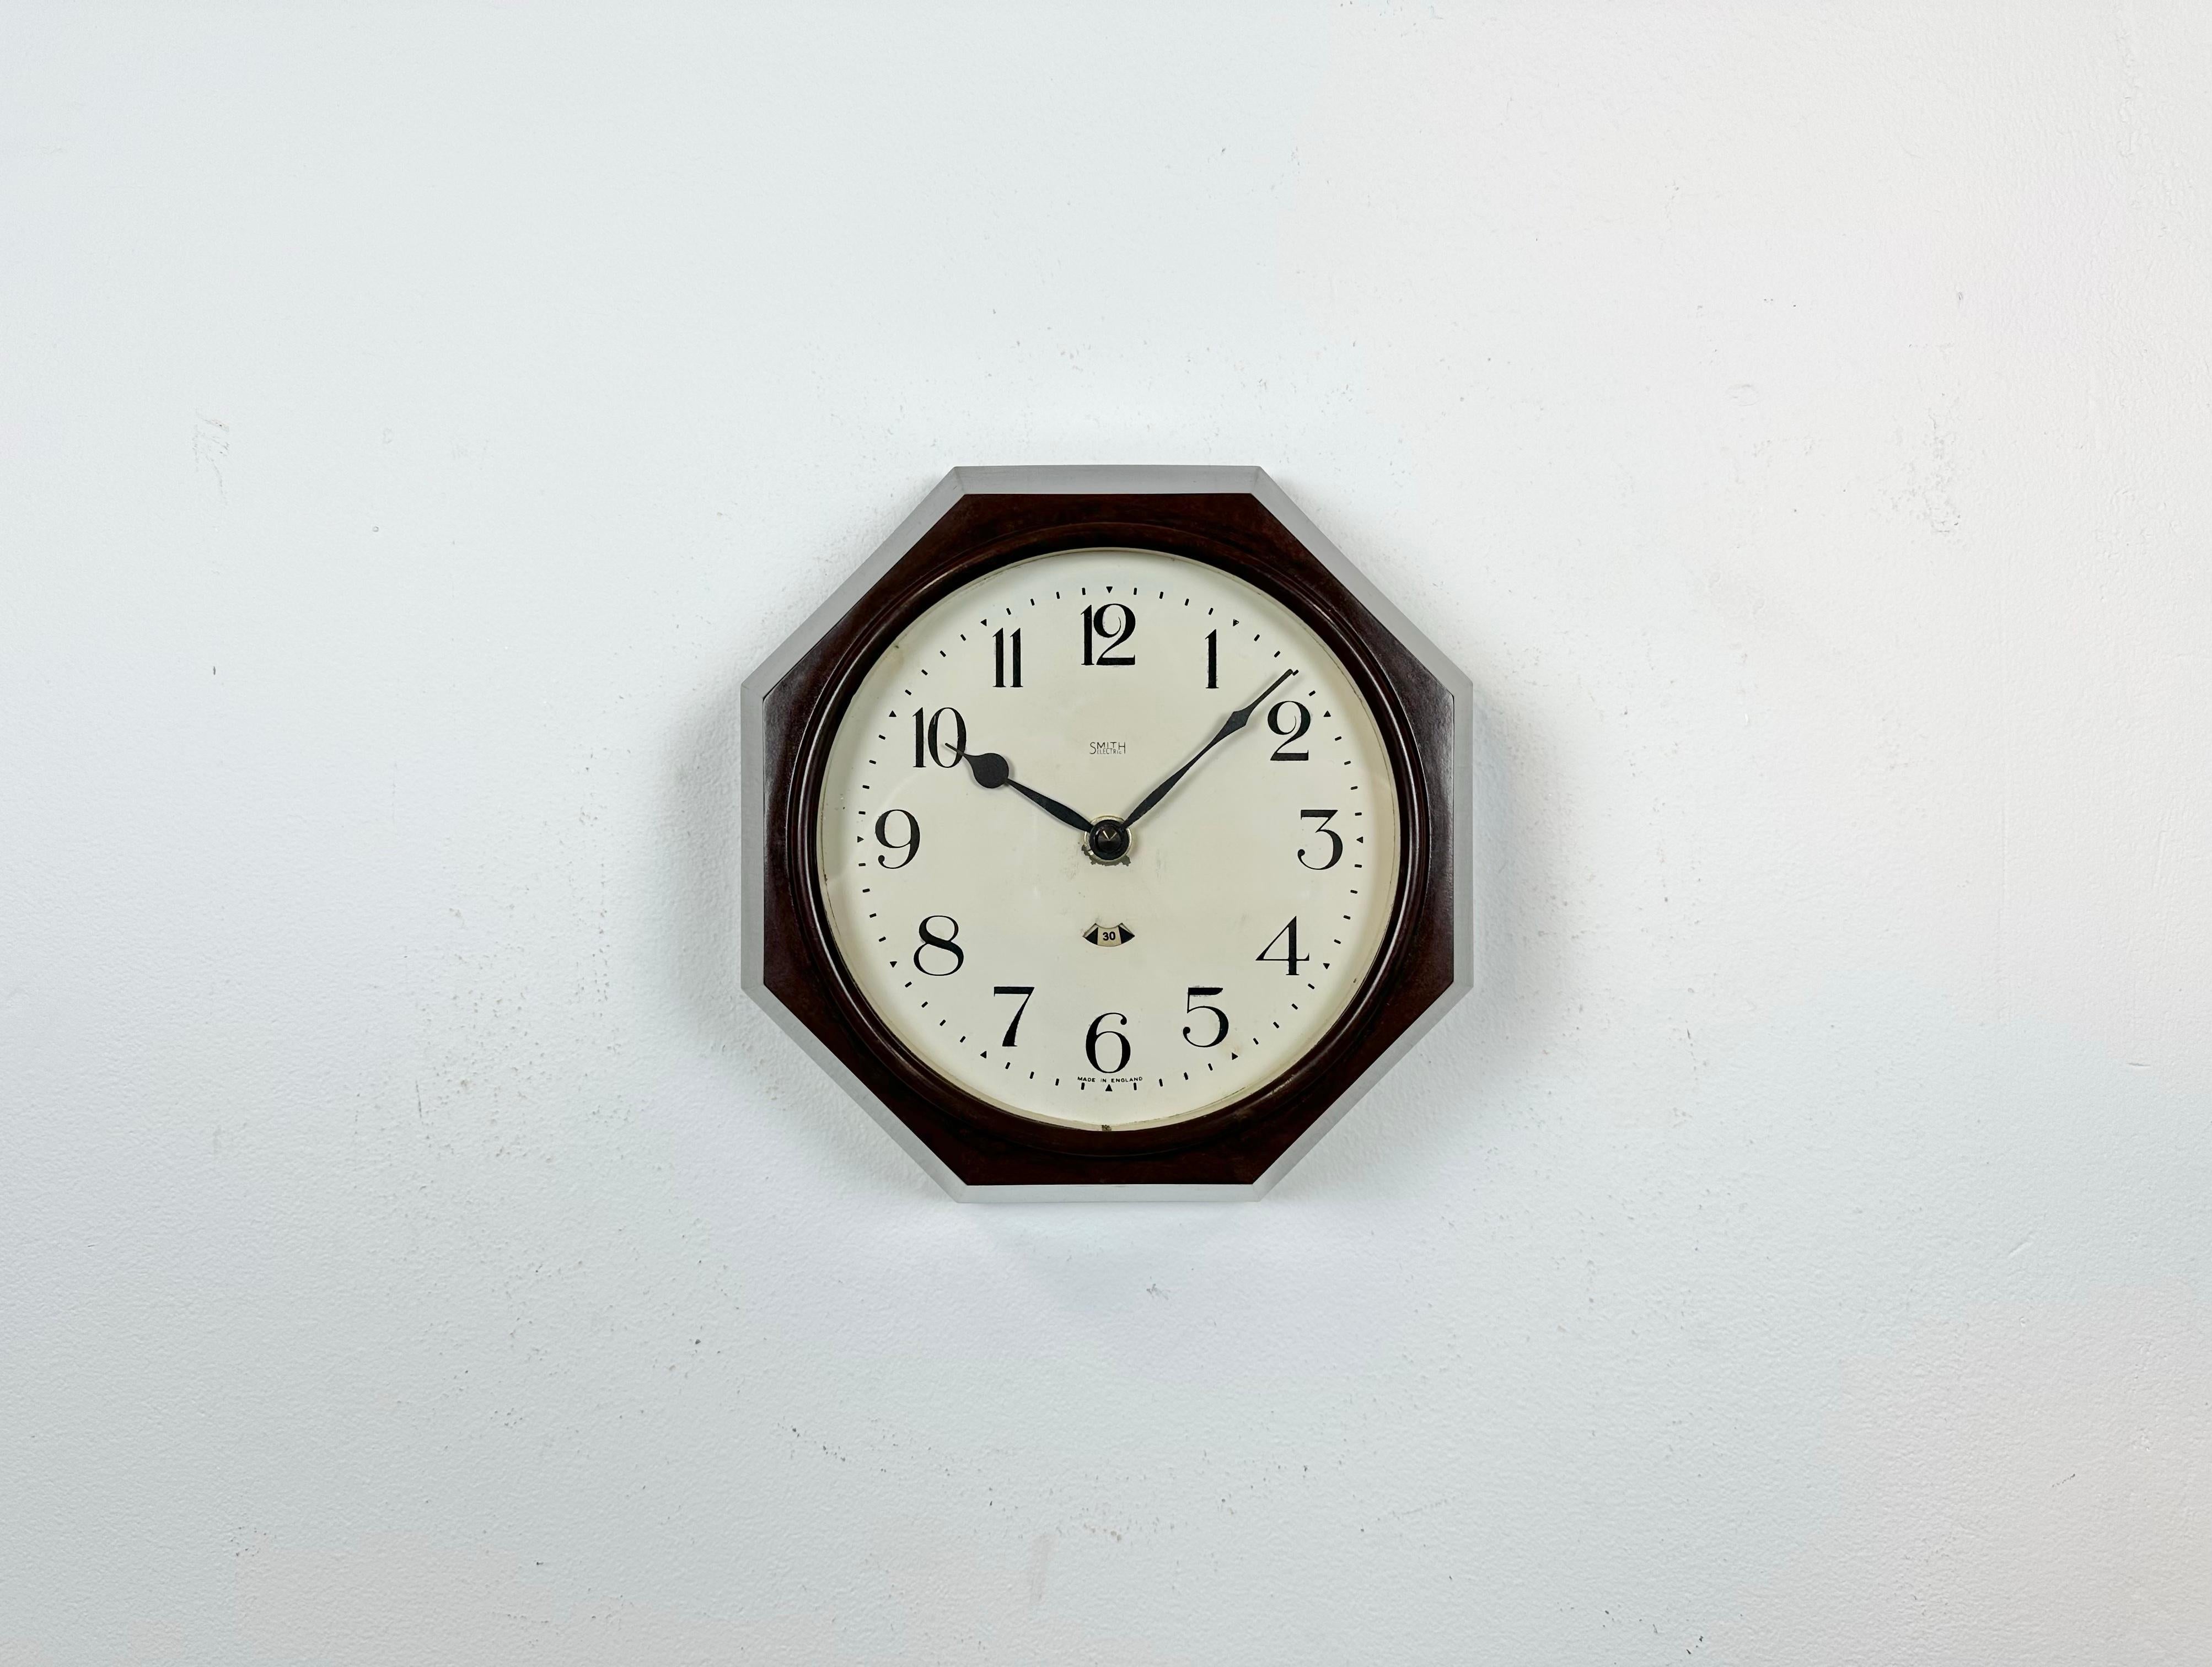 This wall clock was produced by Smith electric in England during the 1950s. It features a brown bakelite frame, an iron dial, an aluminium hands and a clear glass cover. The piece has been converted into a battery-powered clockwork and requires only